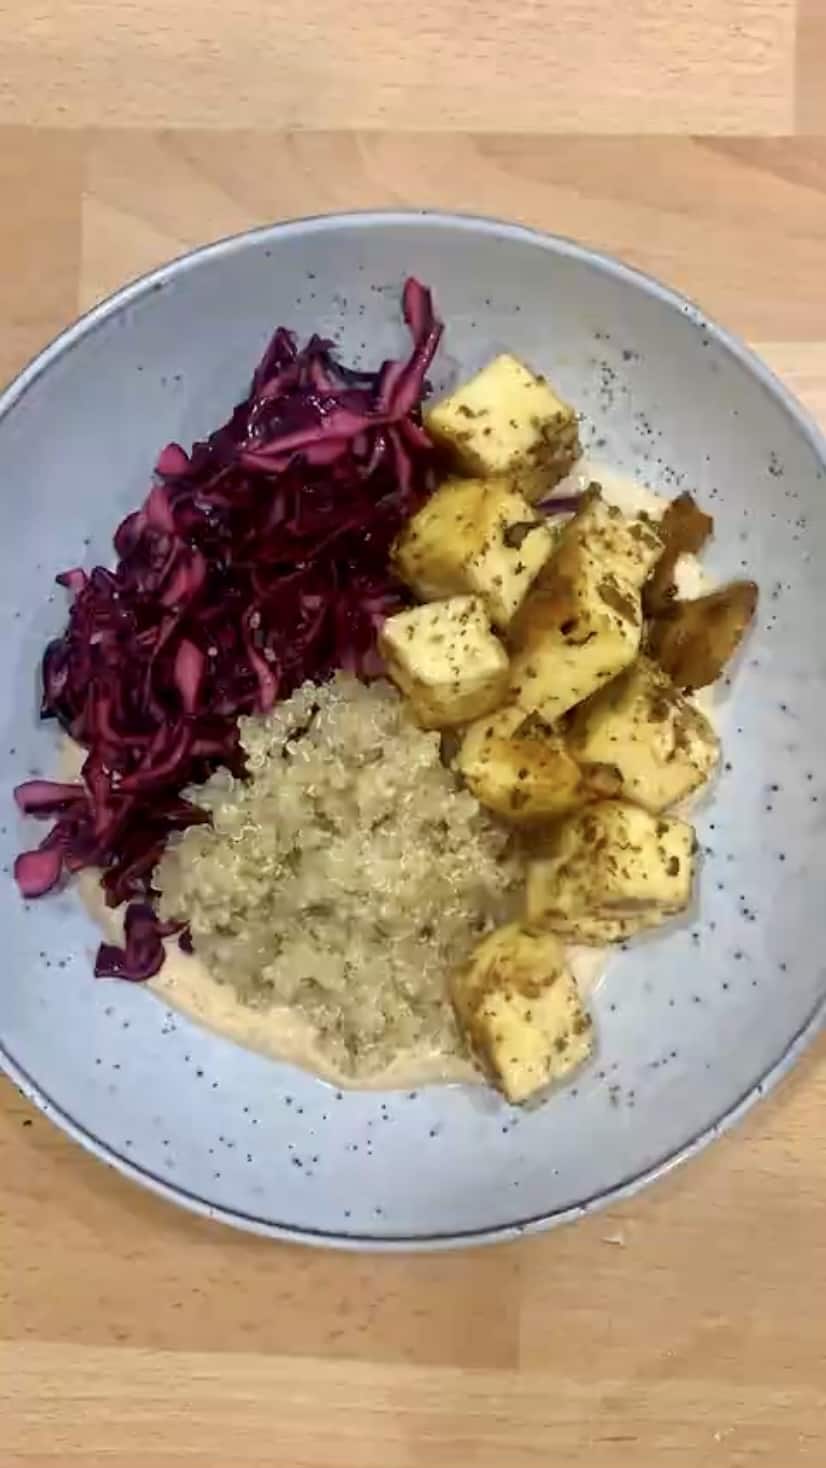 Paneer, quinoa and slaw in a blue bowl